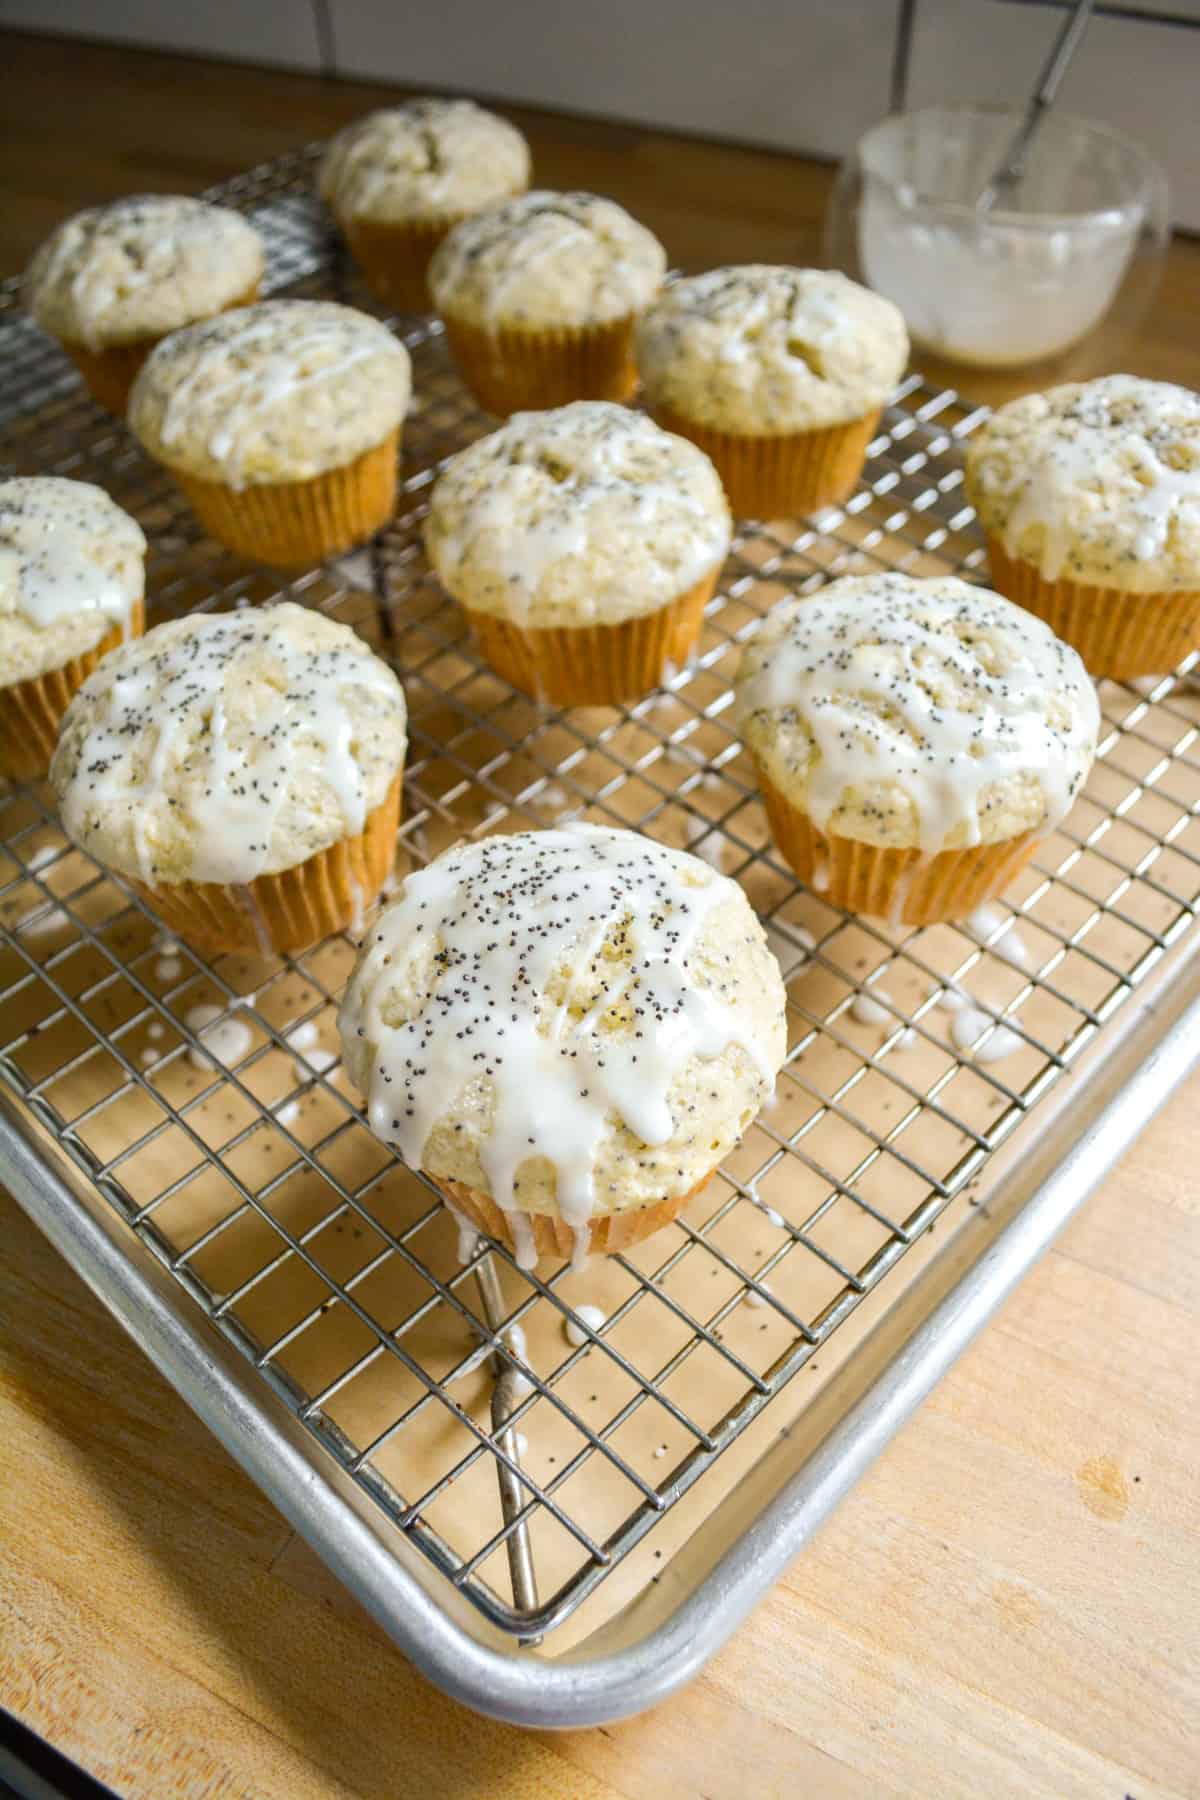 Glazed Vegan Lemon Poppy Seed Muffins on a wire cooling rack that is over a baking sheet.